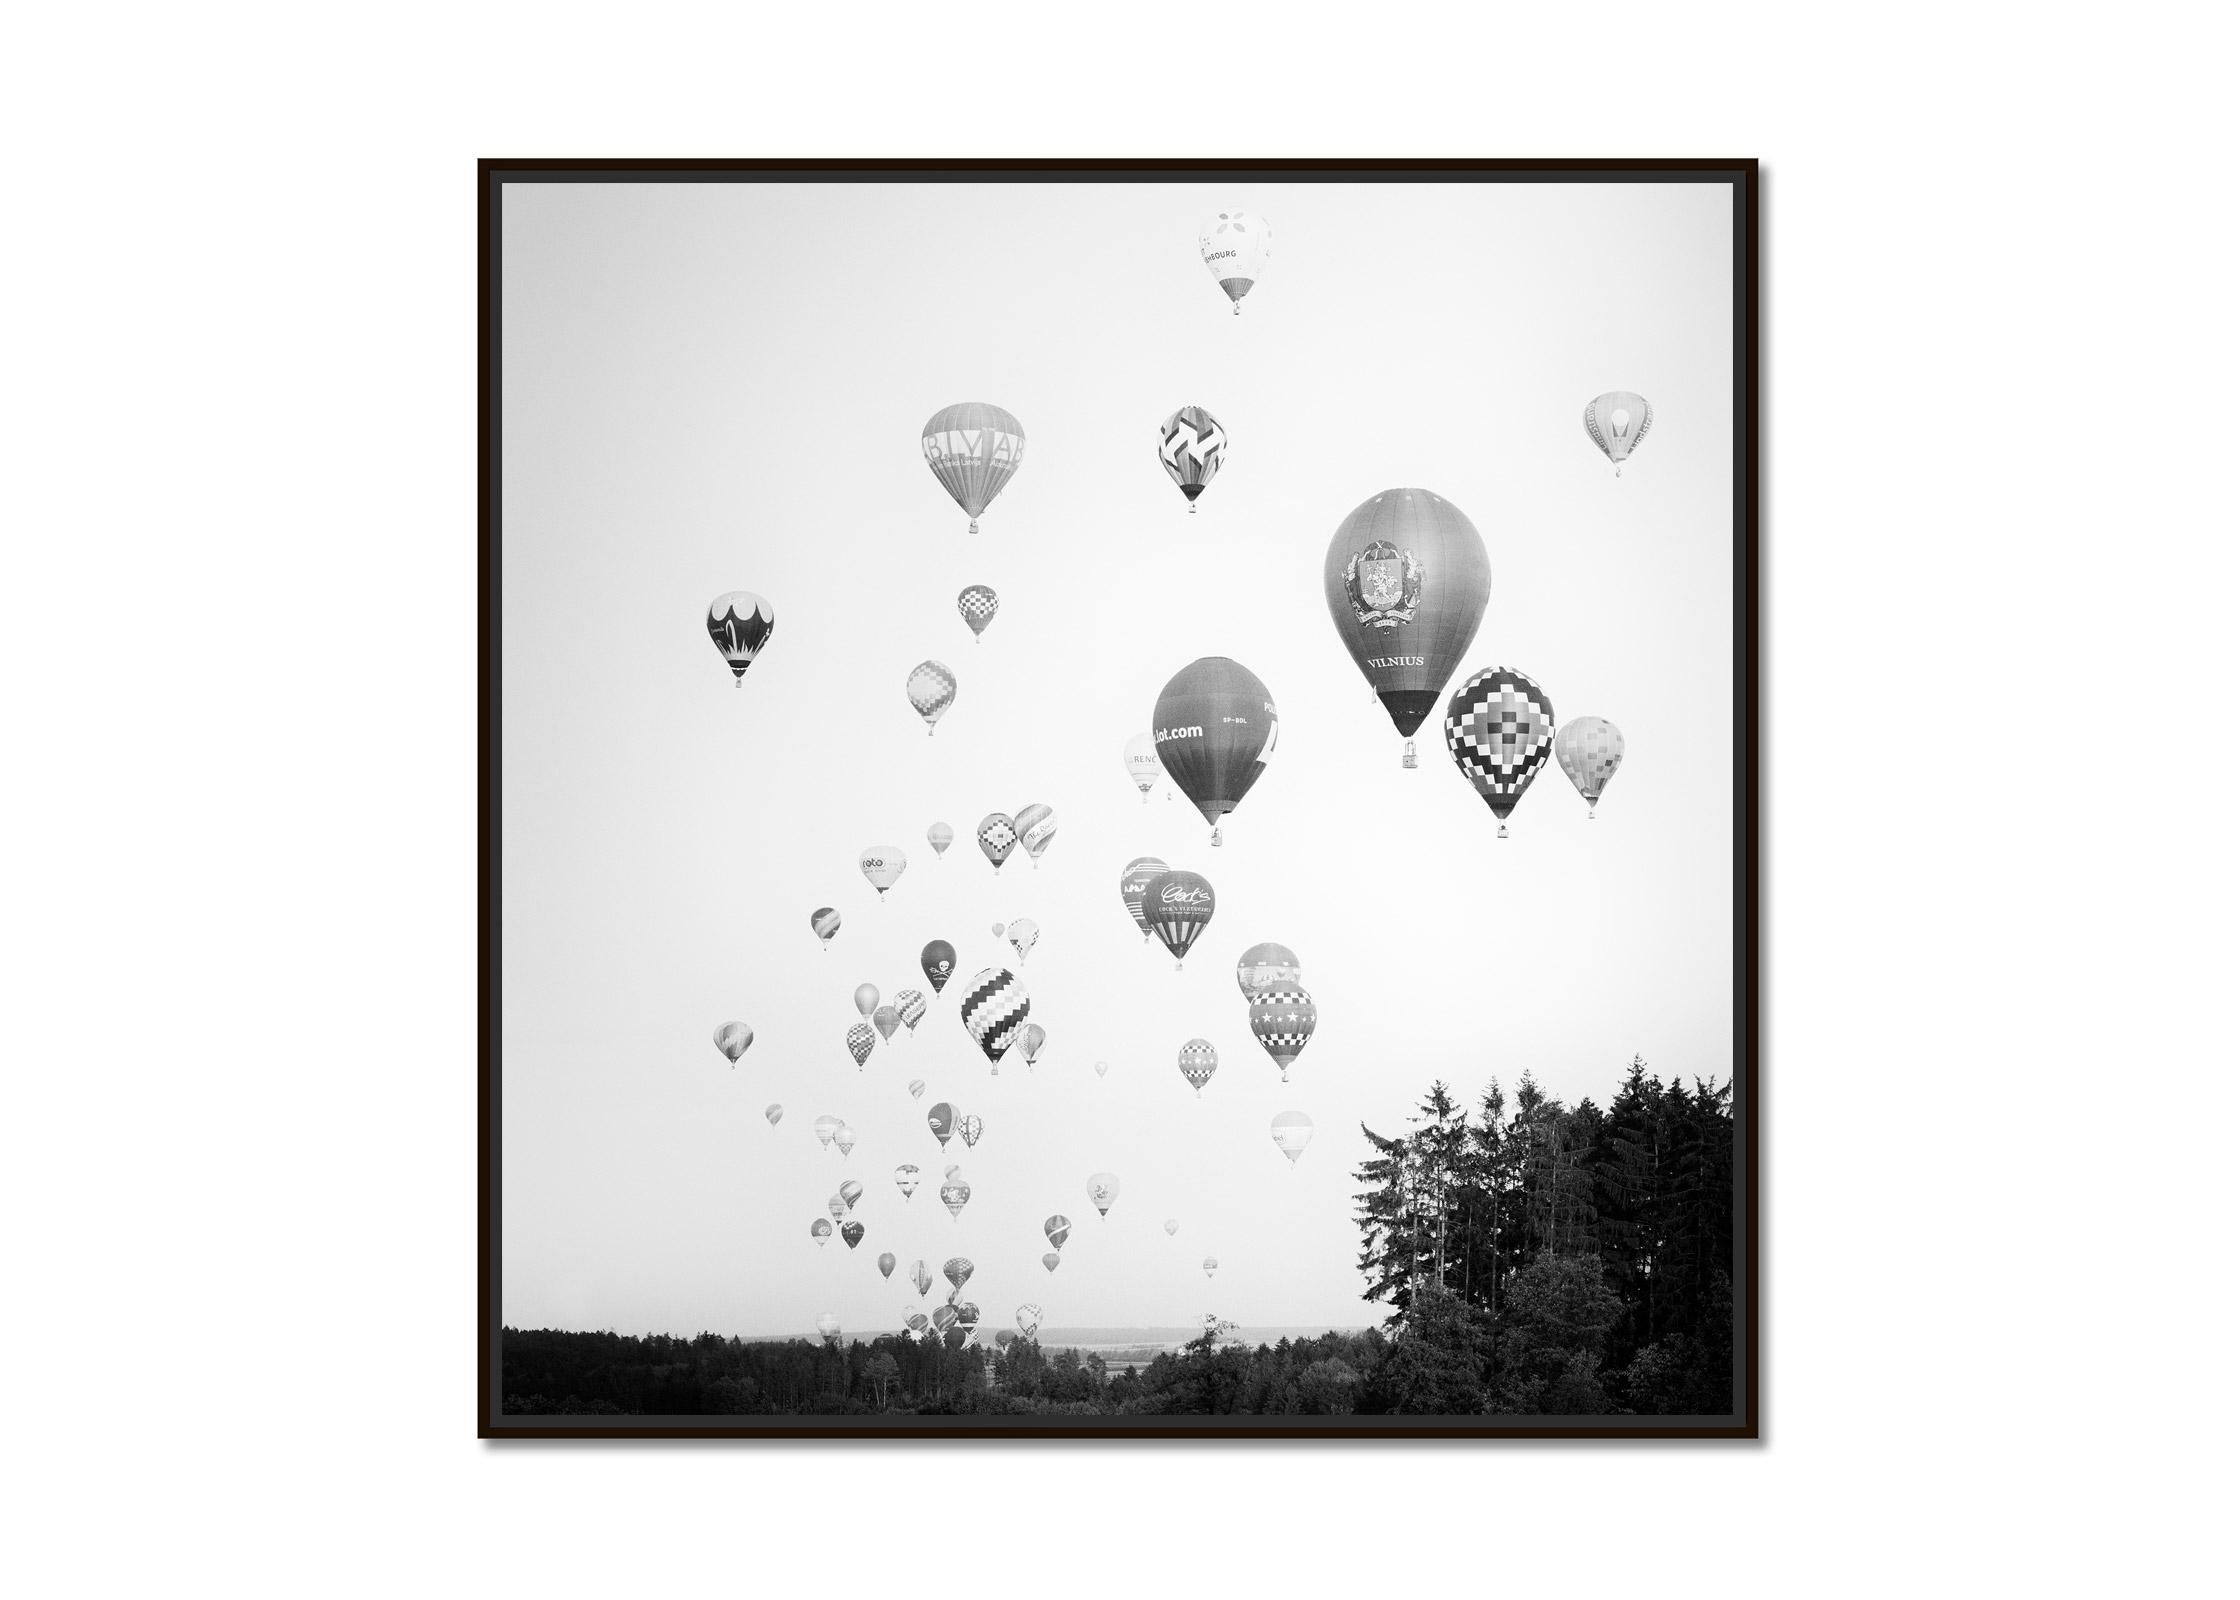 Hot Air Balloon World Championship, black and white art landscape photography - Photograph by Gerald Berghammer